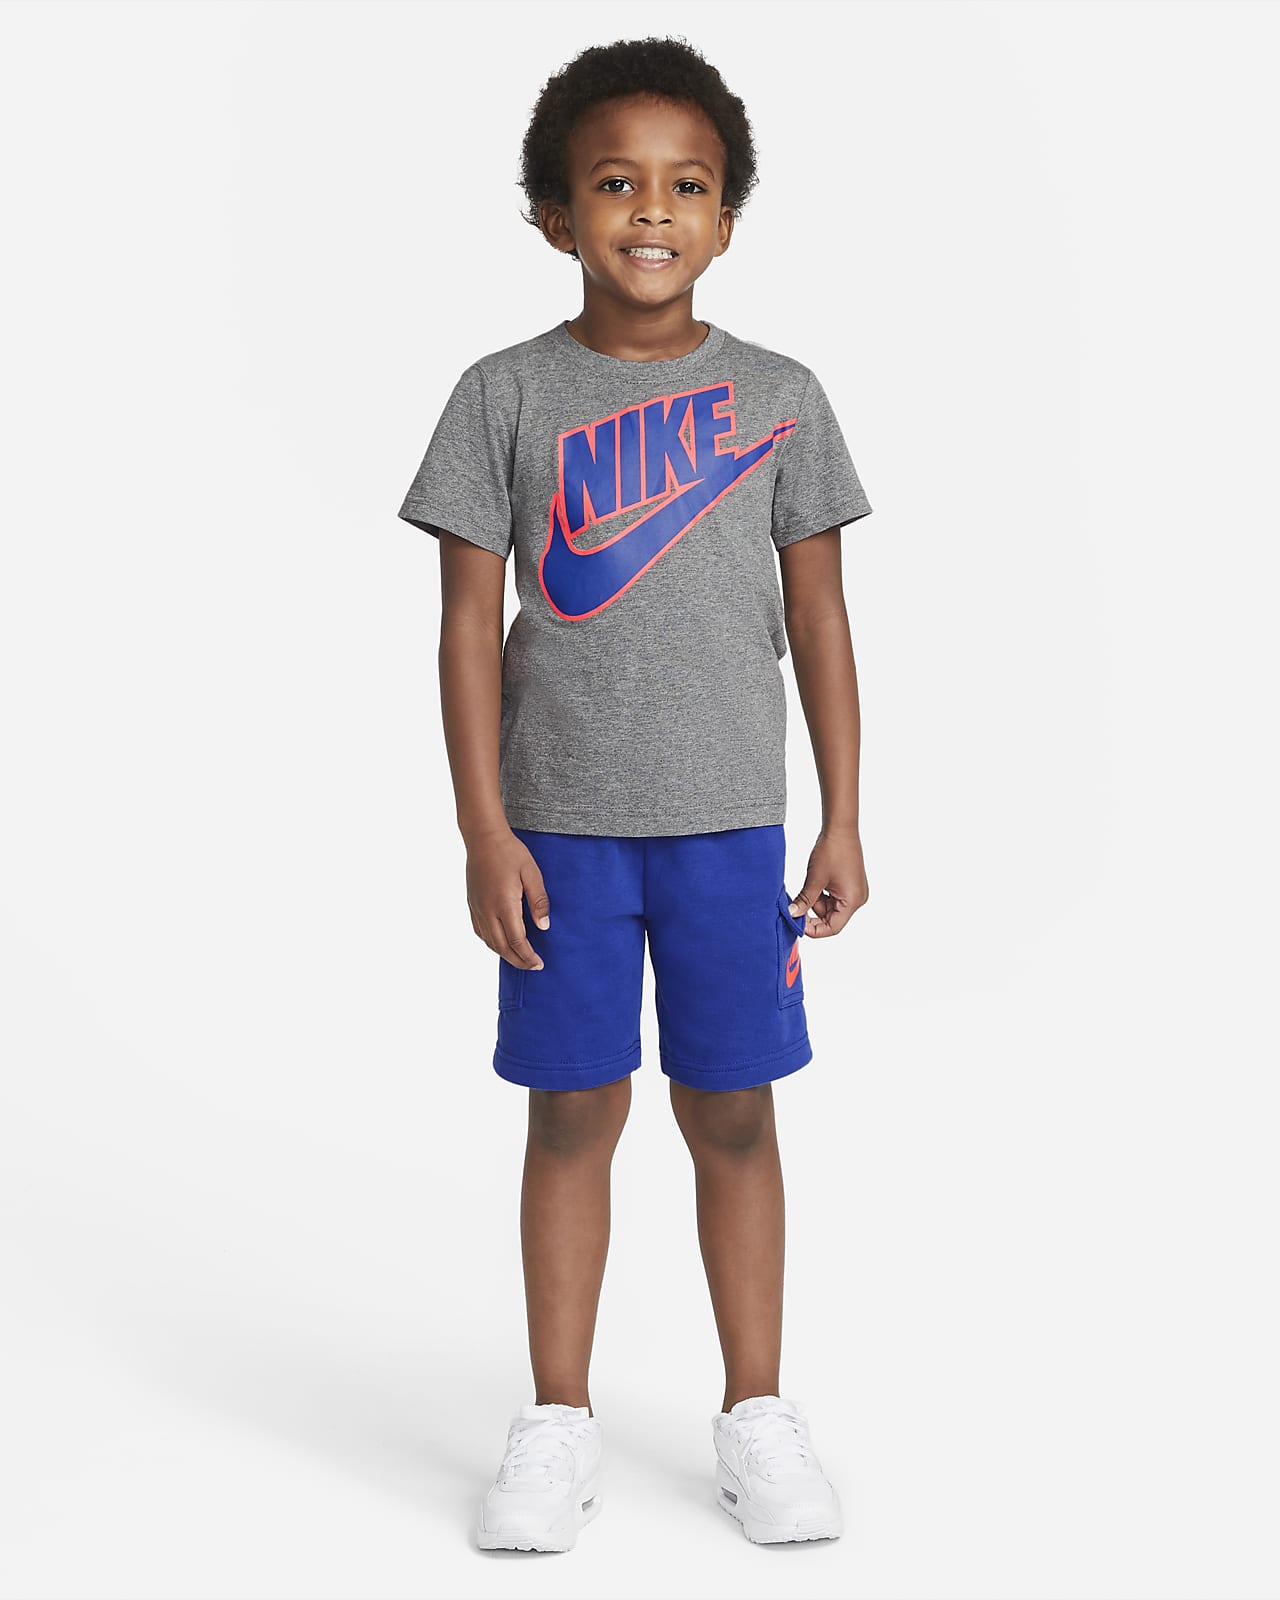 Buy > father son matching nike outfits > in stock